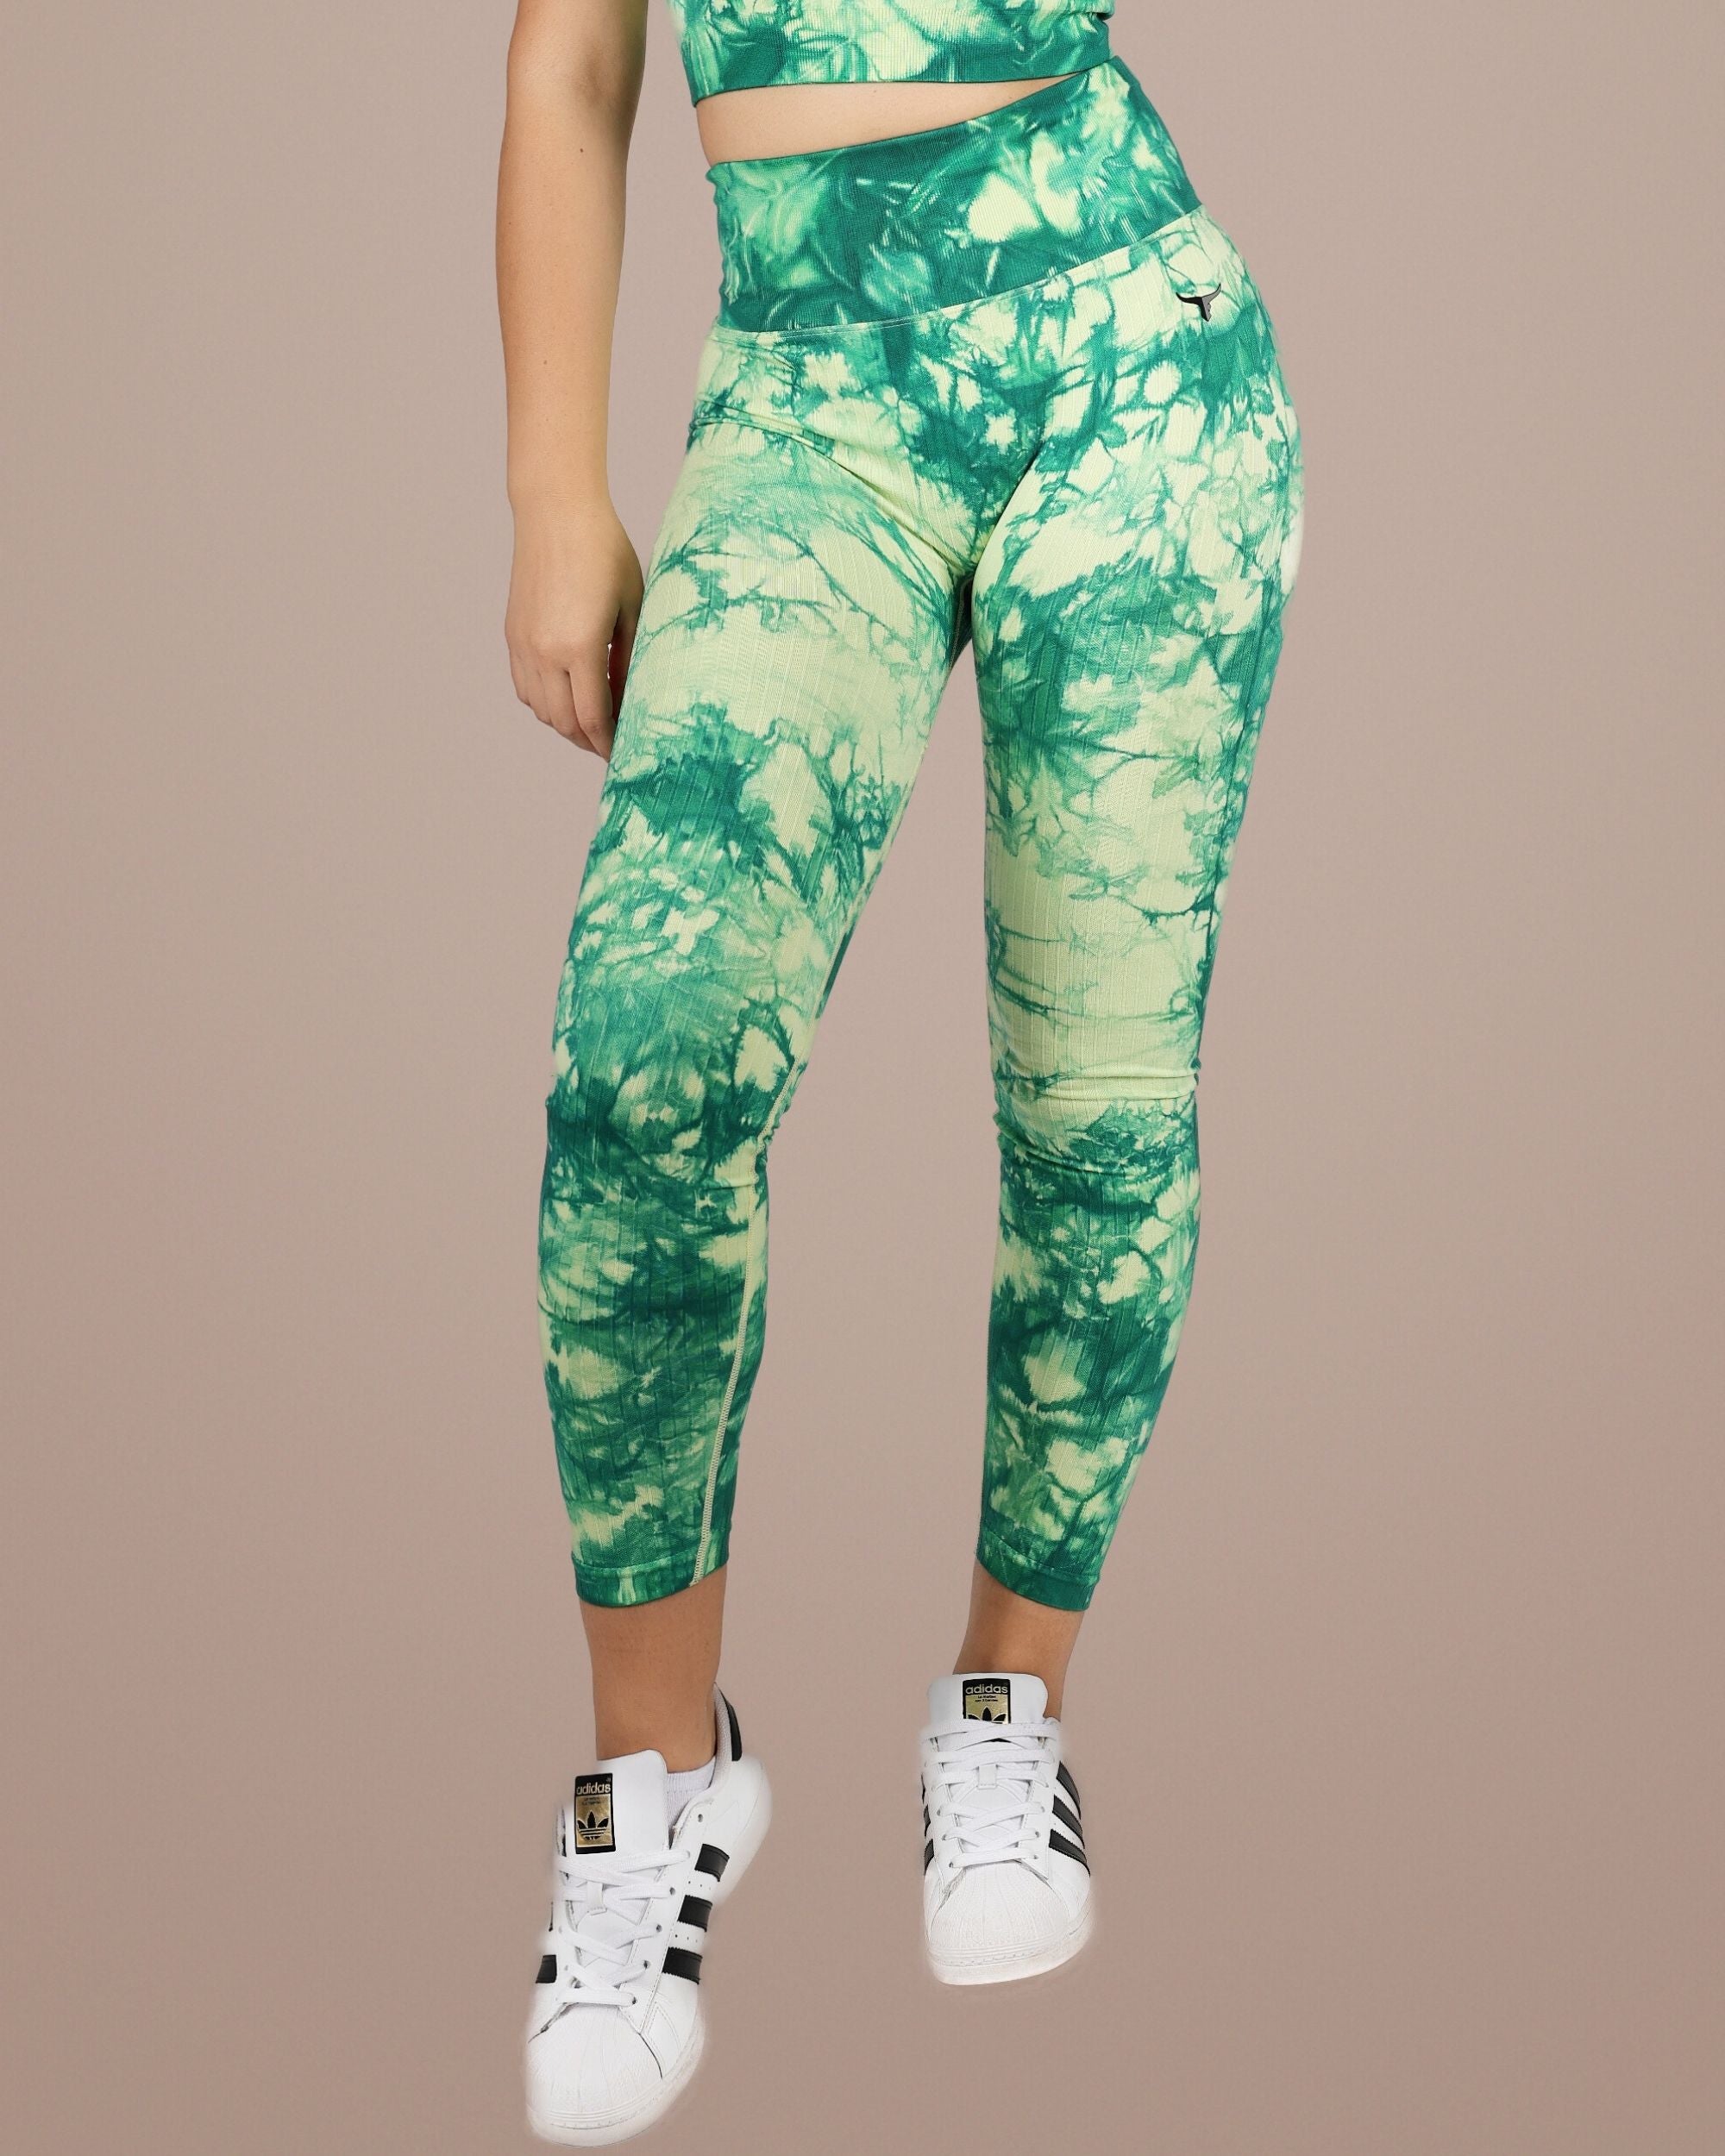 THUGFIT FunkyHues Performance-Stride Fitness Leggings - Green - THUGFIT